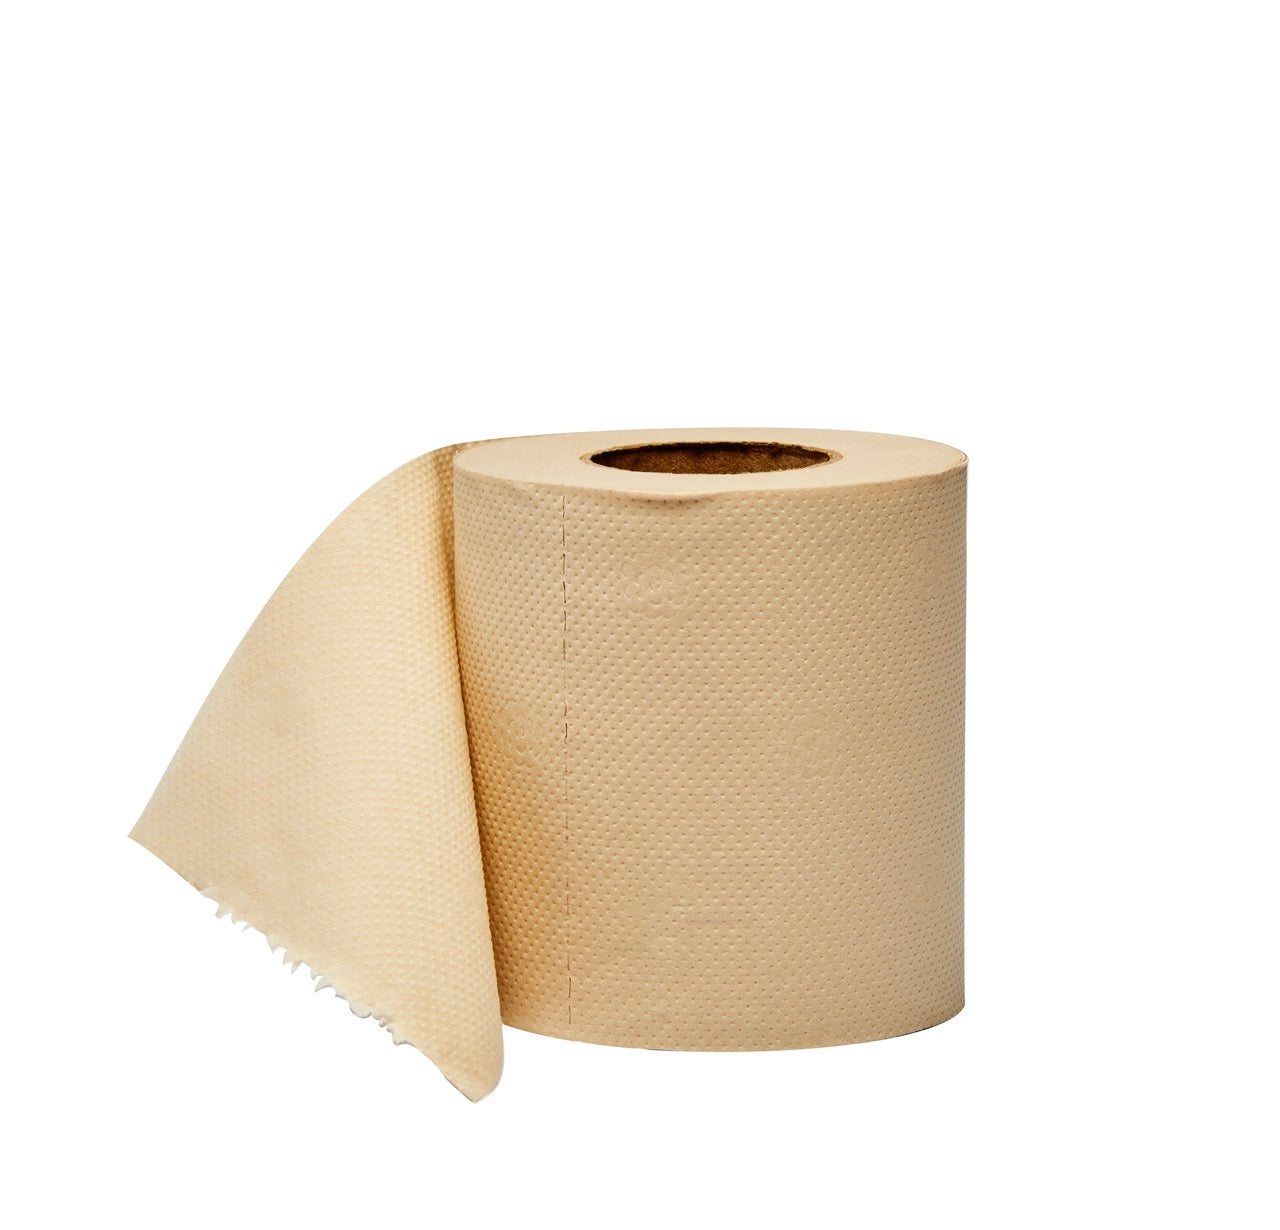 Beco Bamboo Toilet paper roll (3 Ply) - 220 Pulls